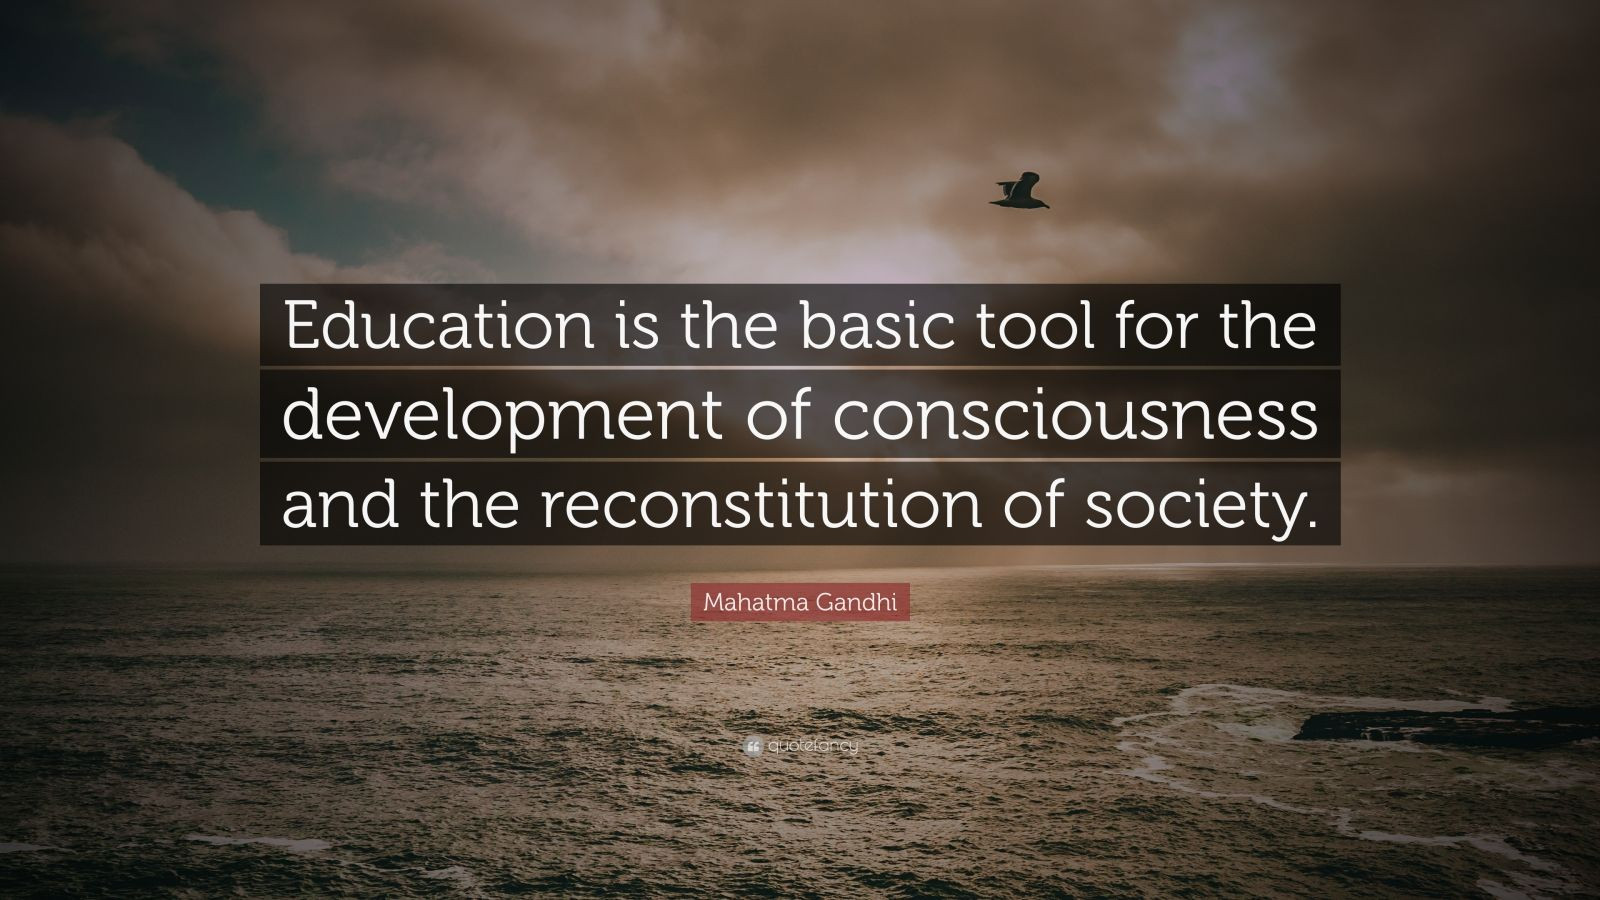 Mahatma Gandhi Quotes On Education
 Mahatma Gandhi Quote “Education is the basic tool for the